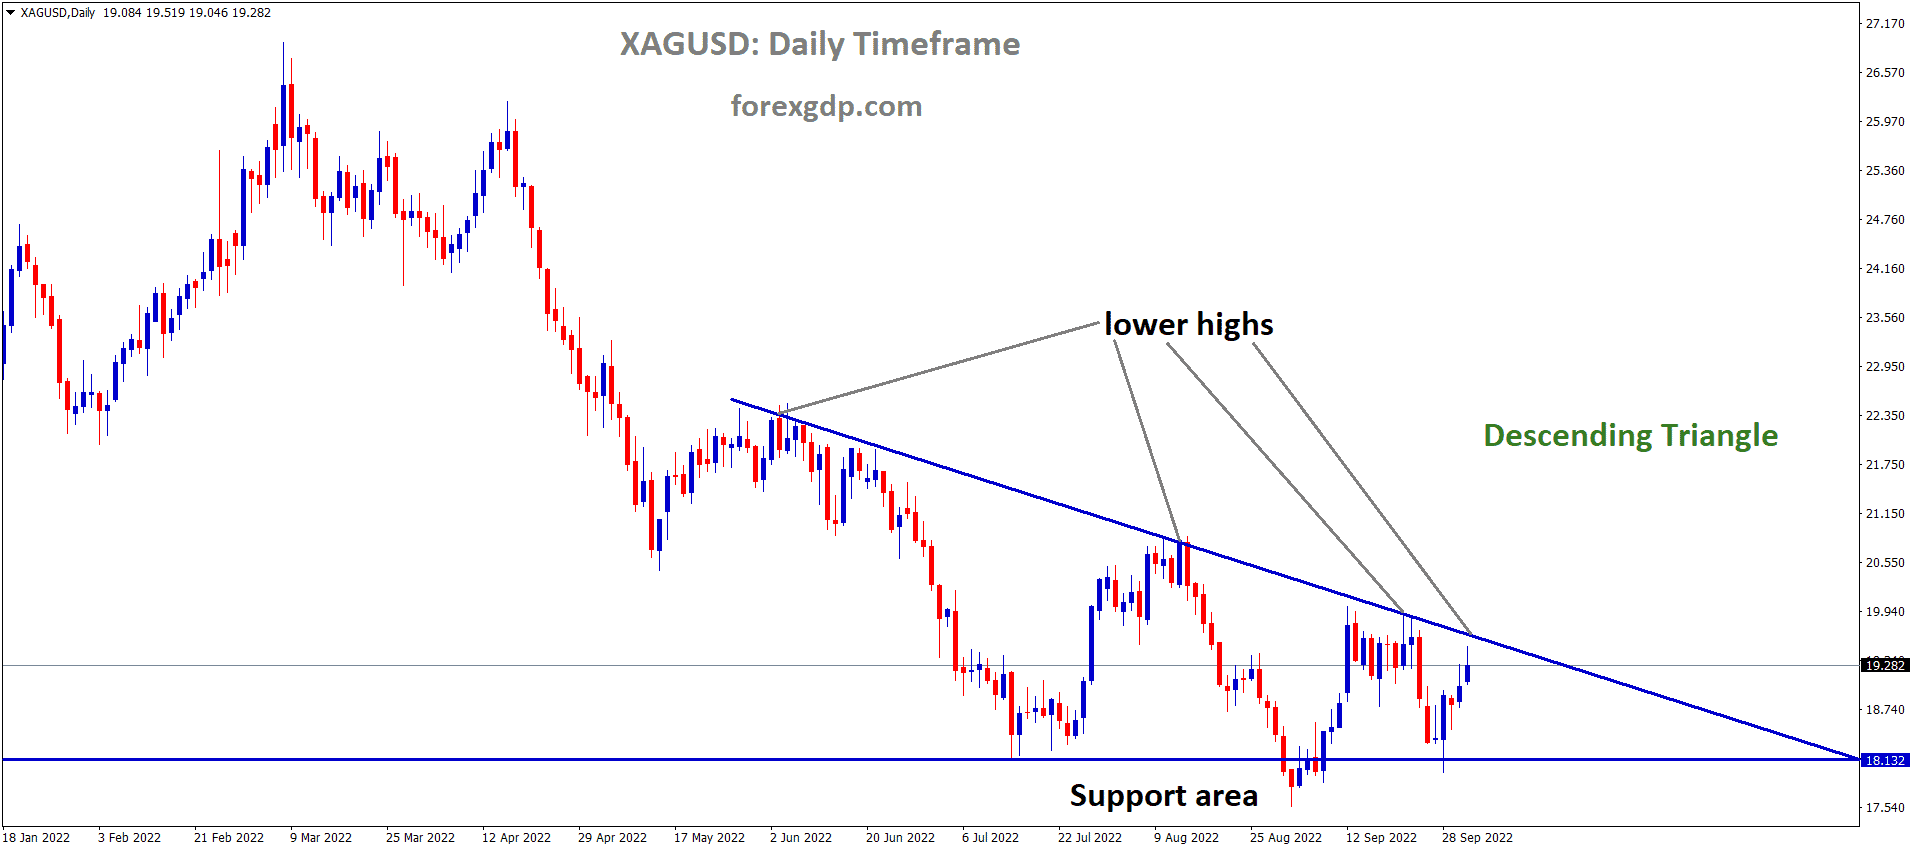 XAGUSD Silver Price is moving in the Descending triangle pattern and the market has reached the lower high area of the triangle pattern